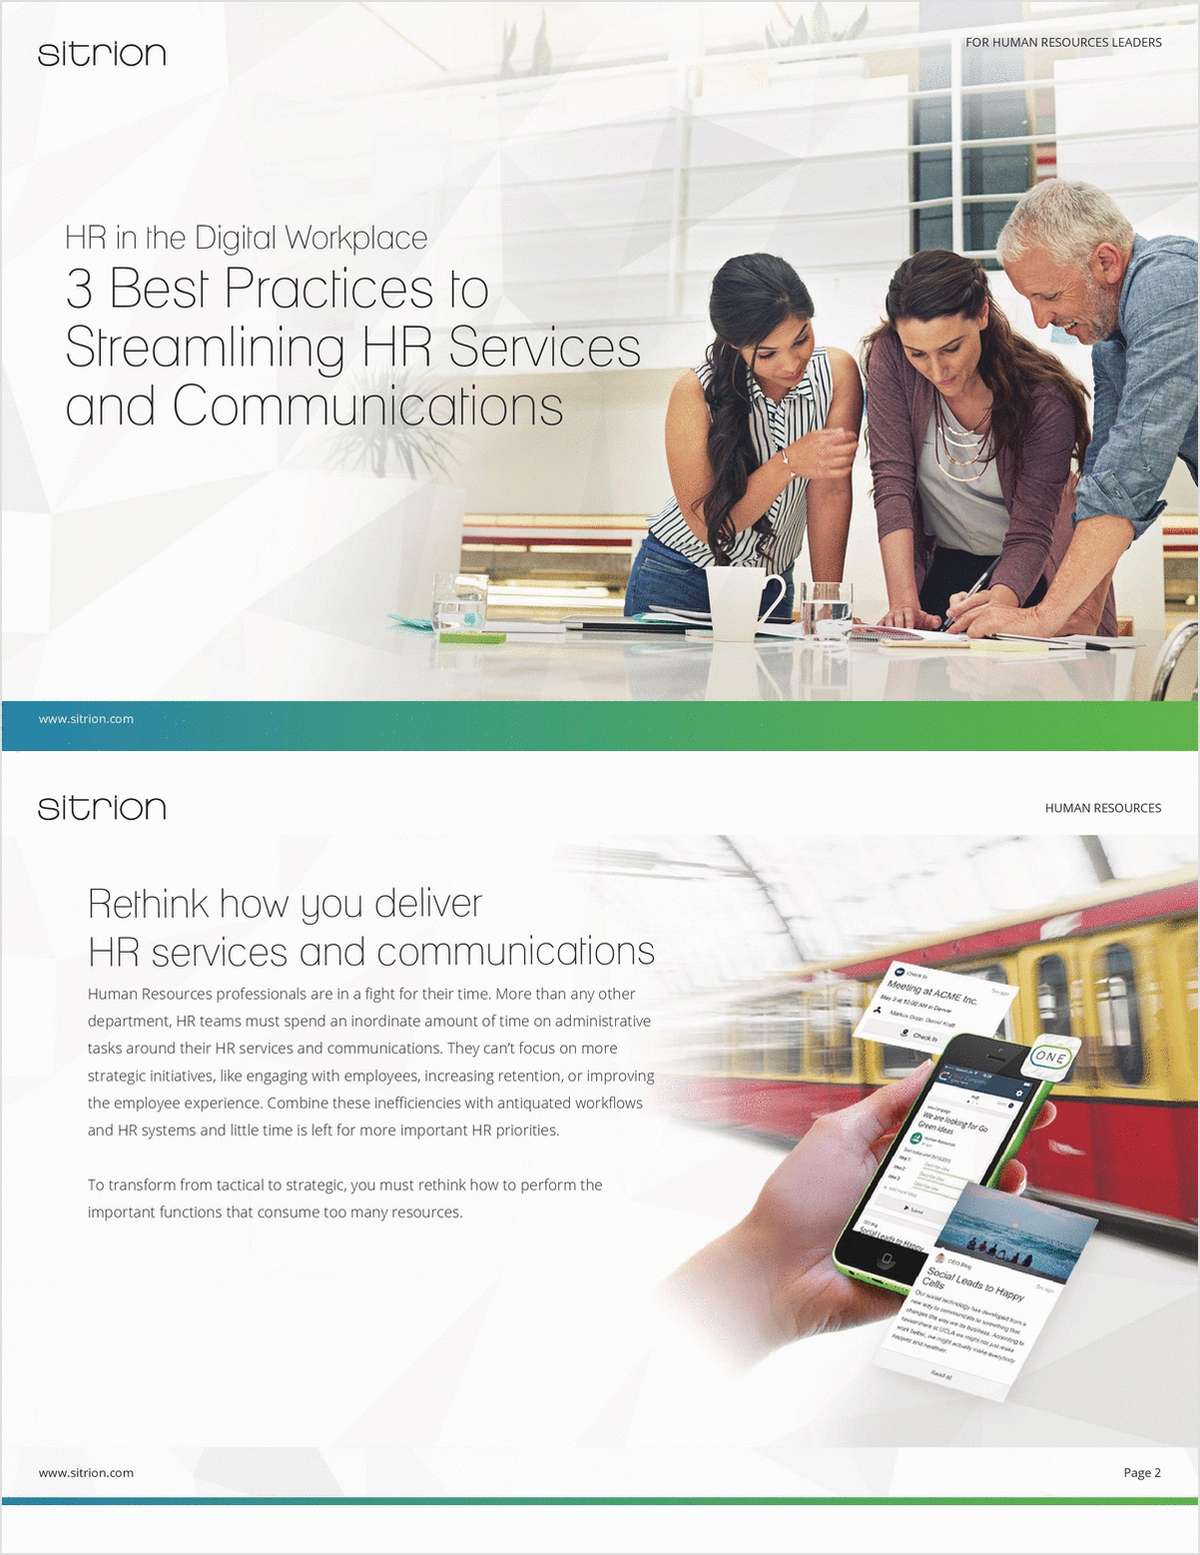 3 Best Practices to Streamlining HR Services and Communications